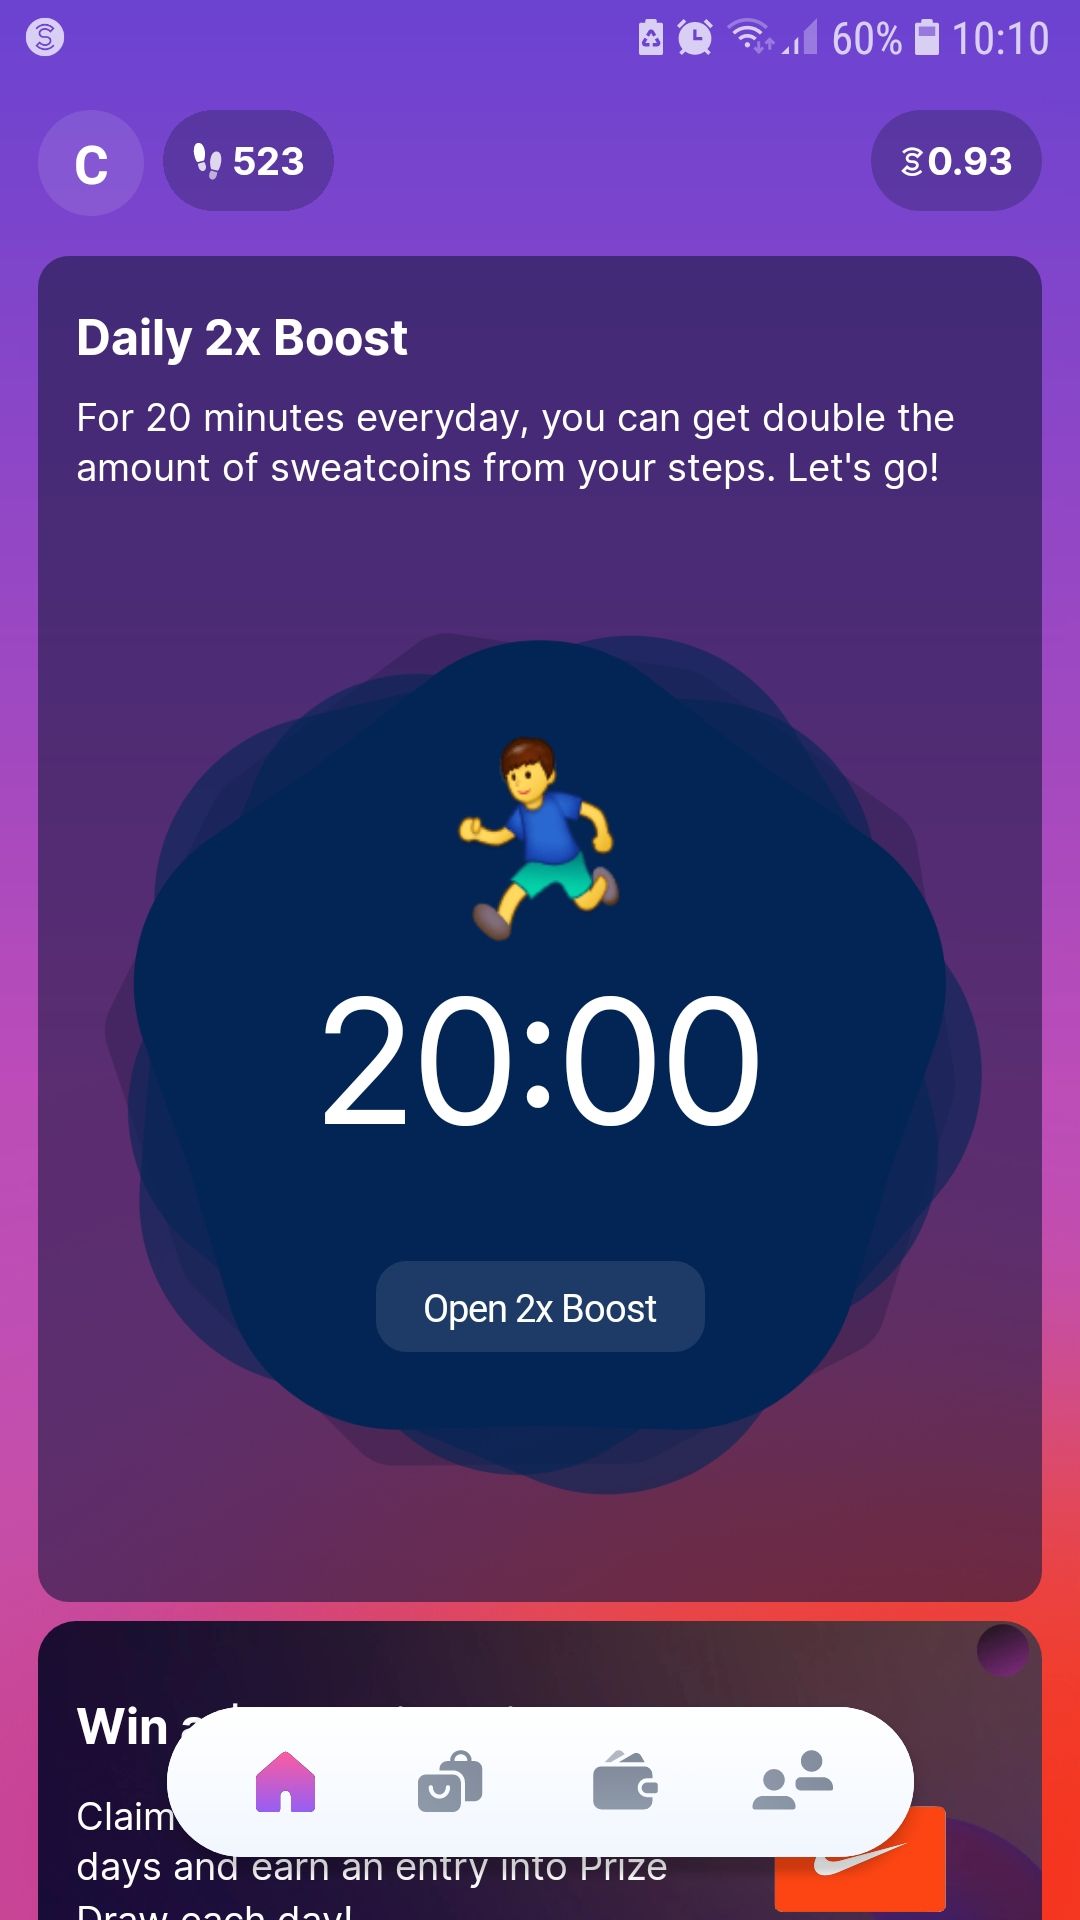 Sweatcoin boost step counter fitness app